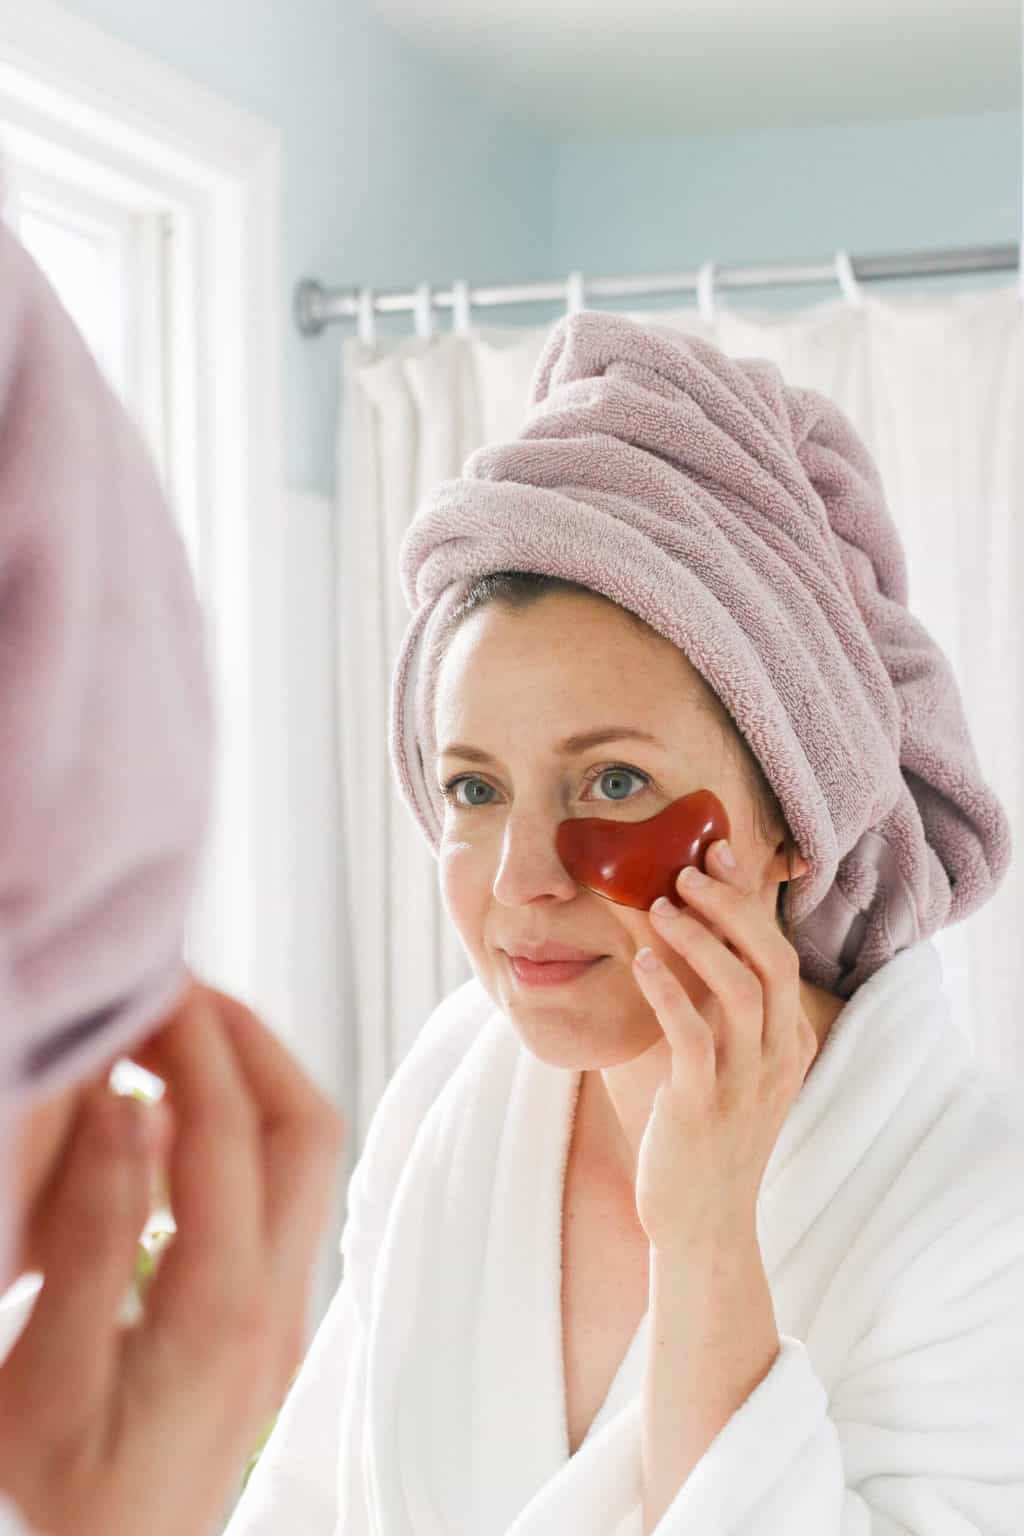 These homemade gel eye mask patches are loaded with pomegranate and rose hip seed oil to hydrate, plump and get rid of those pesky eye bags.